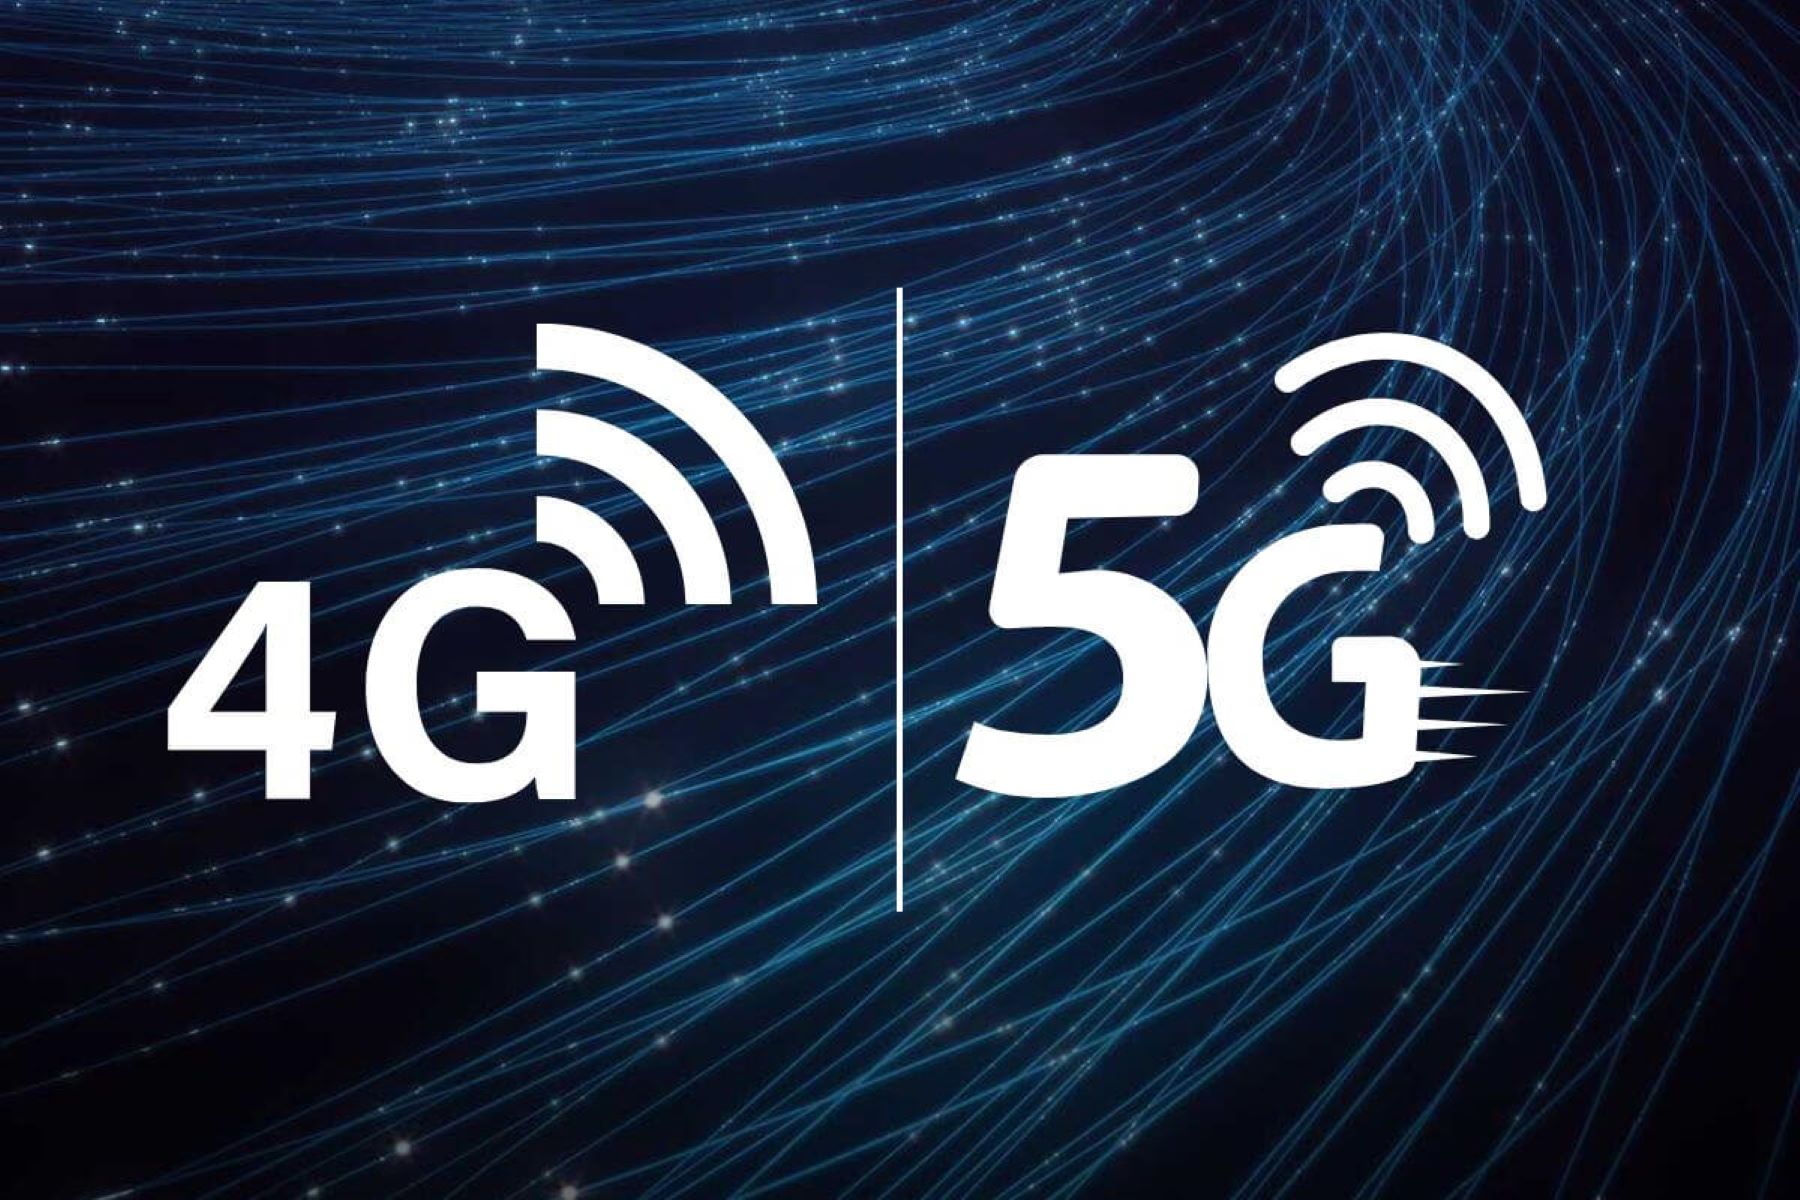 What Is Difference Between 4G And 5G